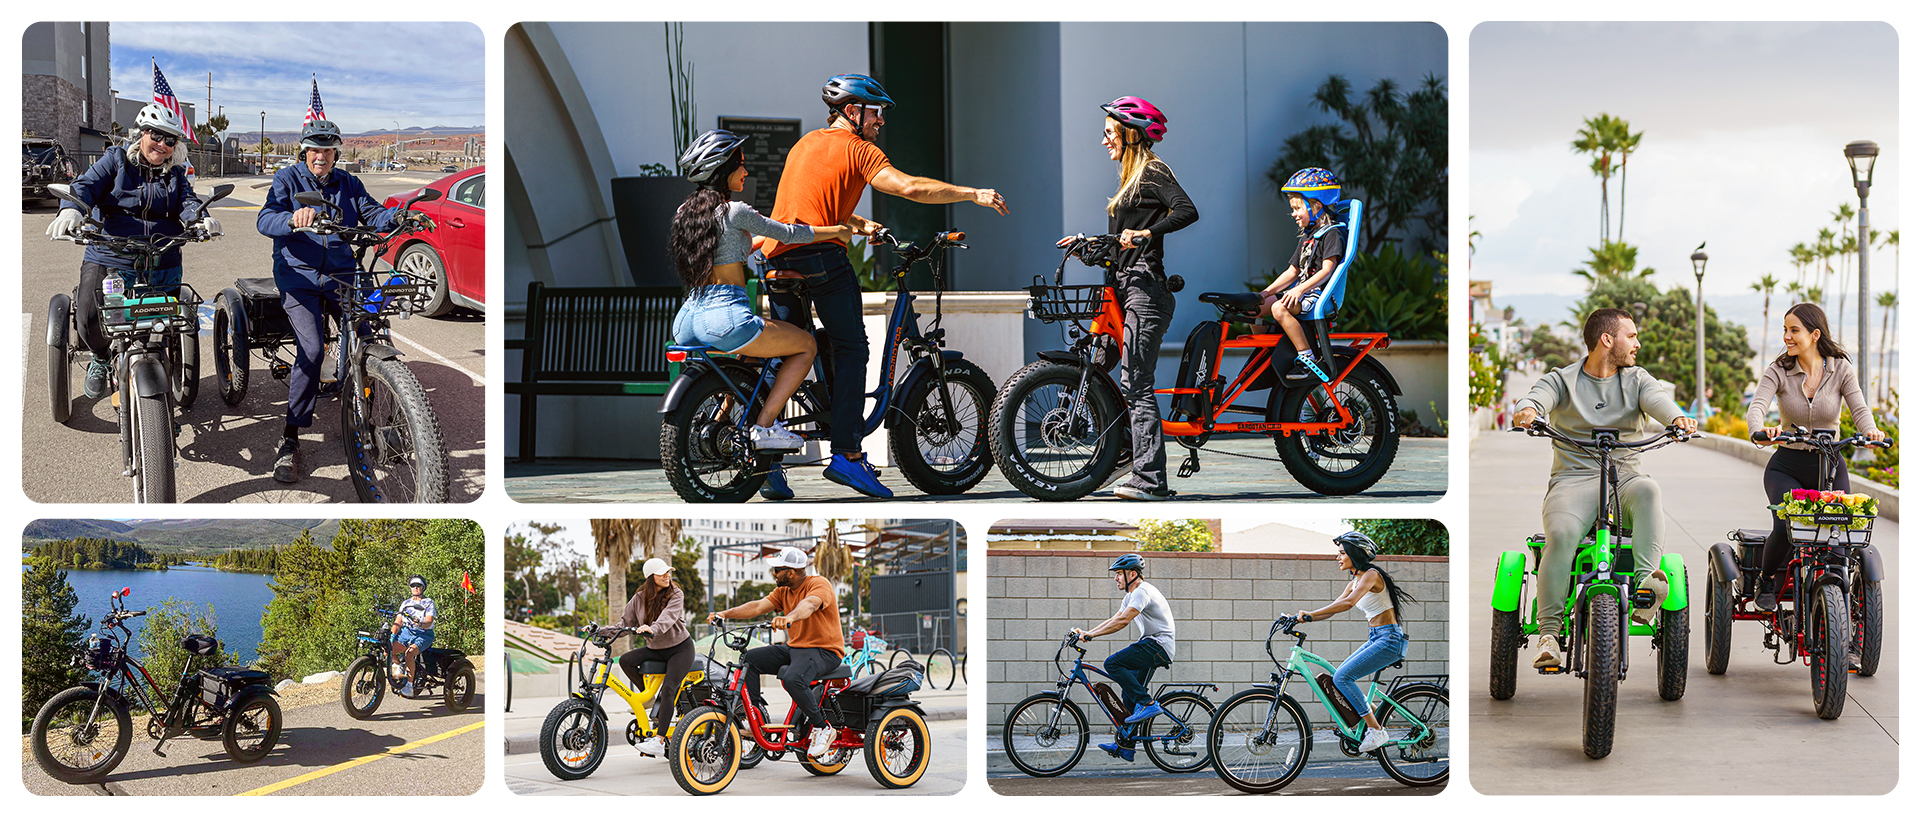 riding electric bikes and electric trikes happily